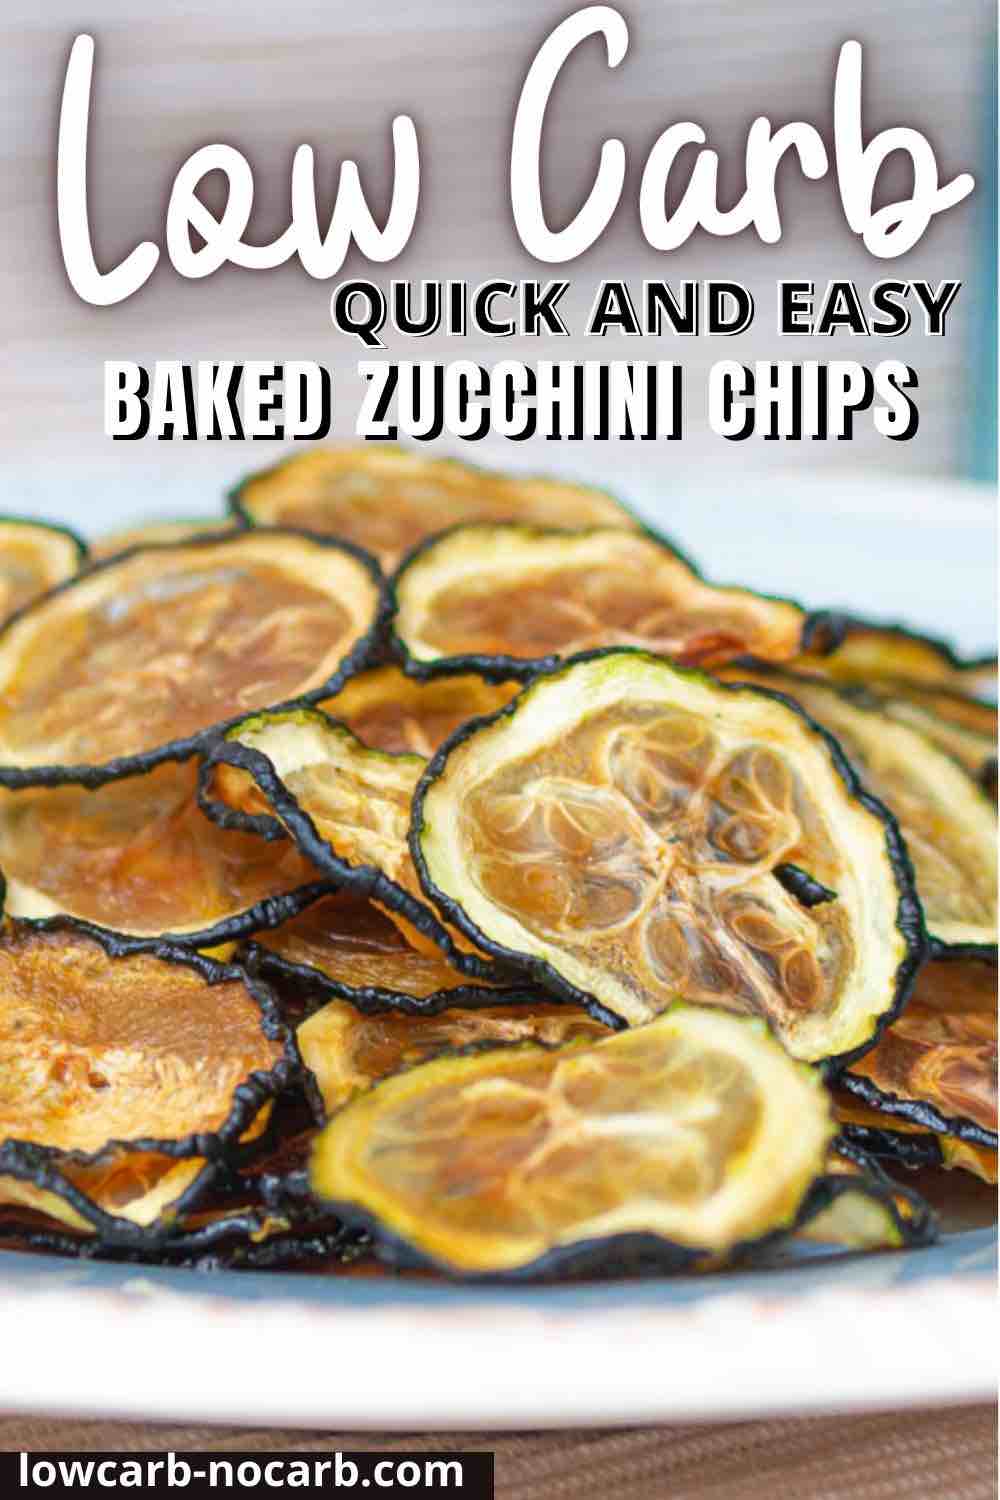 Low carb quick and easy baked zucchini chips.